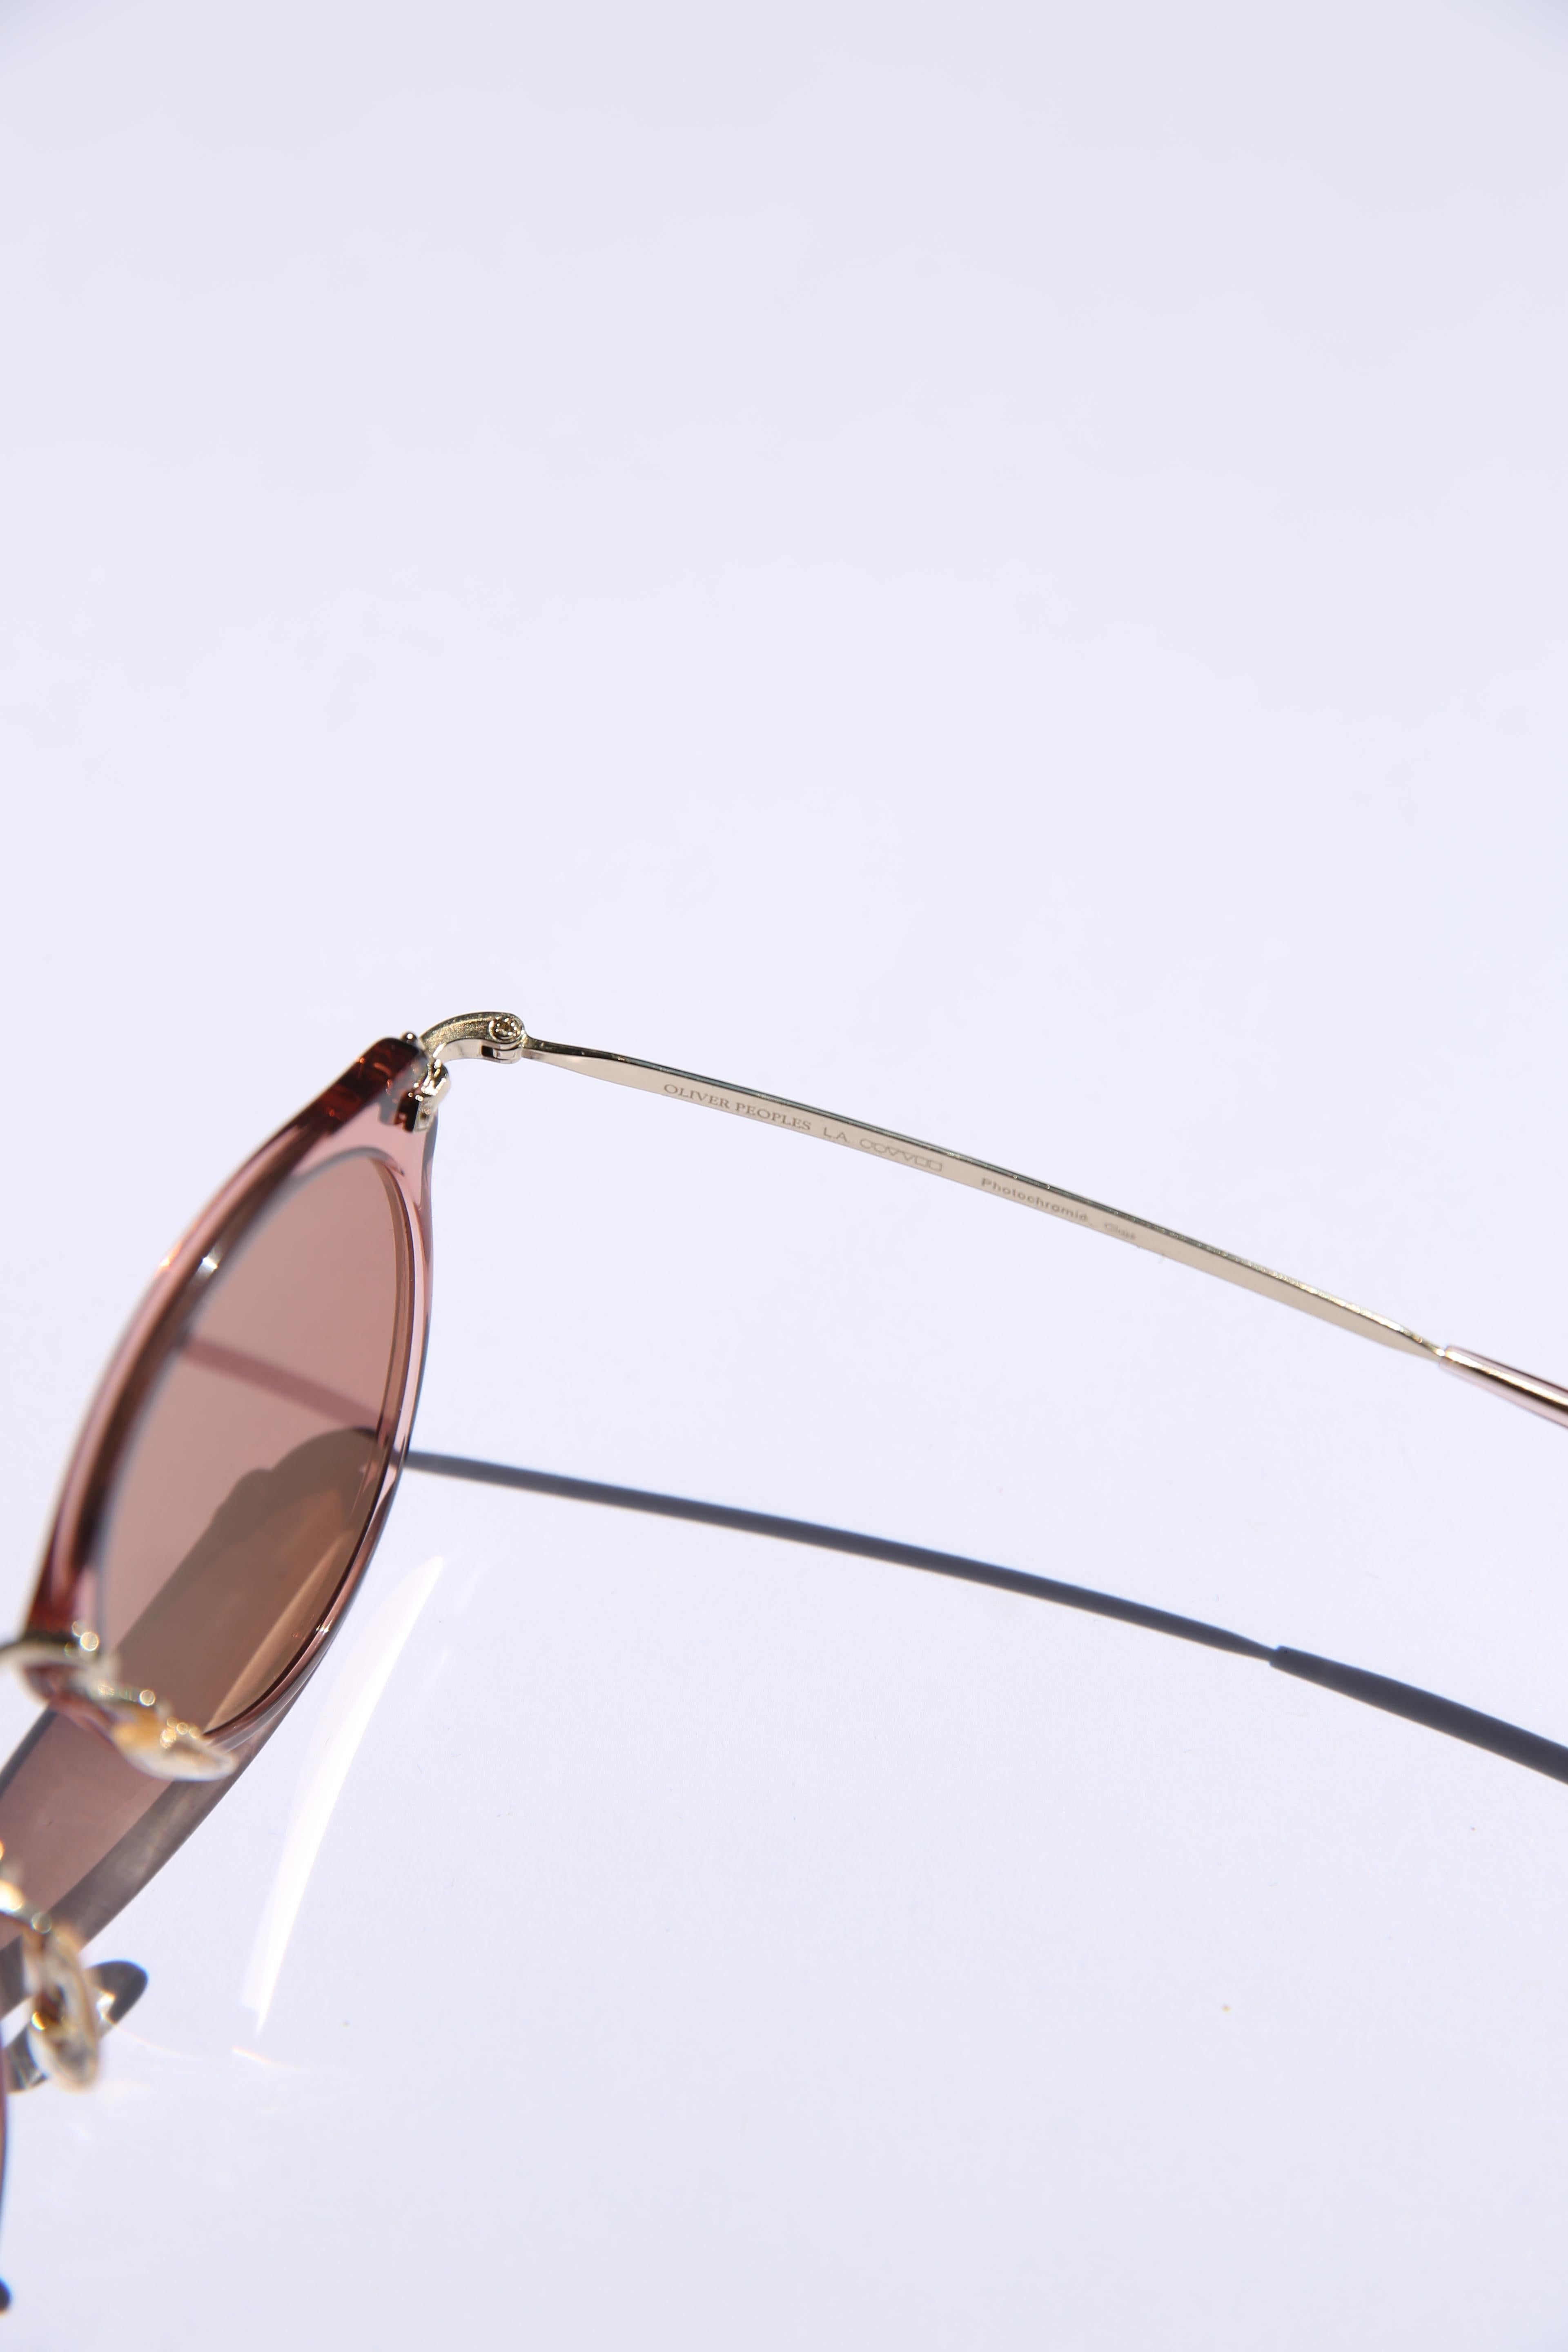 Oliver Peoples OP-505 Sunglasses pink rose brown gold oversized plastic acetate In Excellent Condition For Sale In Paris, FR